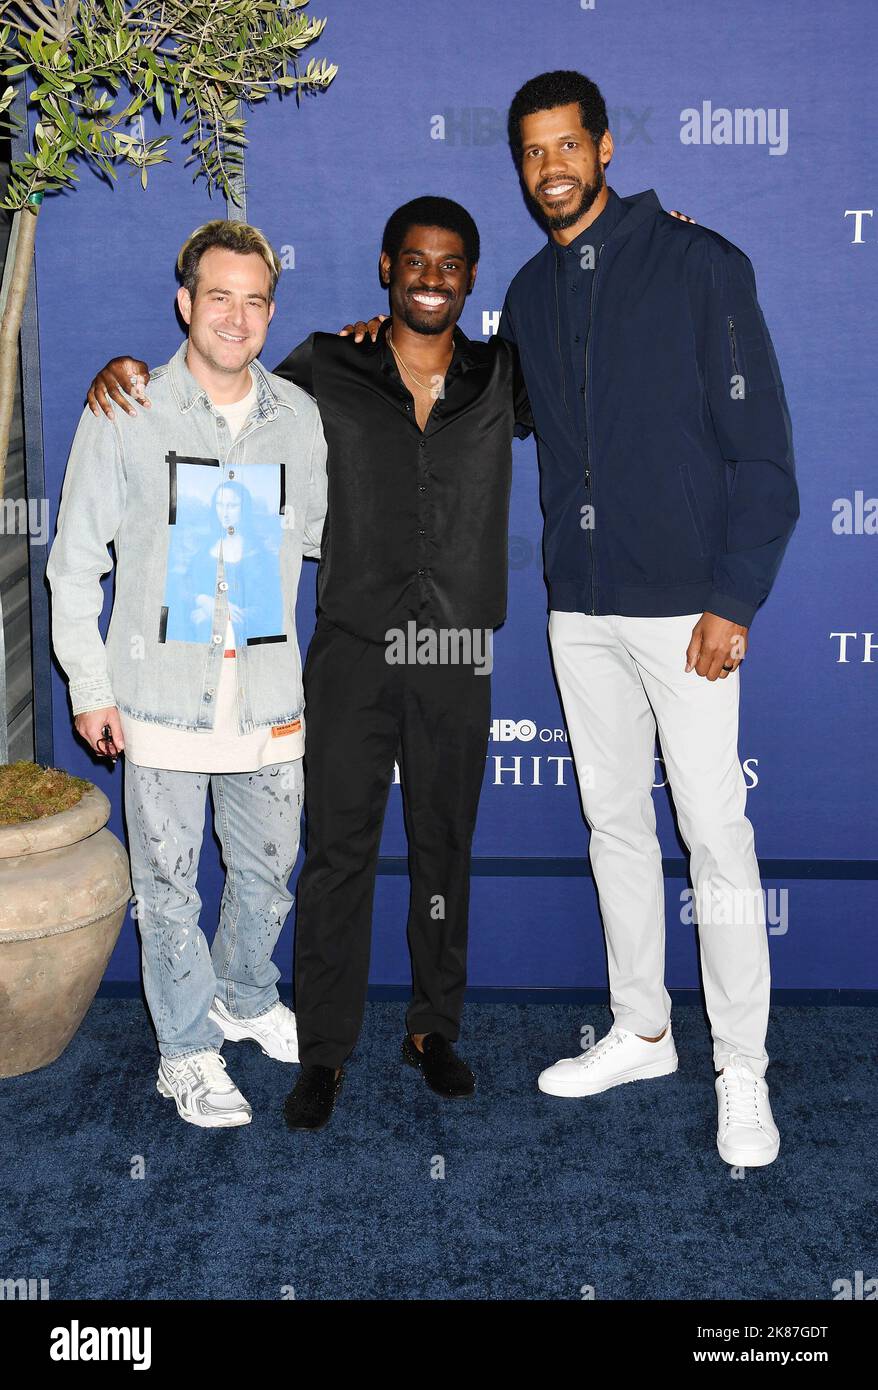 Los Angeles, USA. 20th Oct, 2022. (L-R) Max Borenstein, Delante Desouza and Solomon Hughes attend the Los Angeles Season 2 Premiere of HBO Original Series 'The White Lotus' at Goya Studios on October 20, 2022 in Los Angeles, California. Credit: Jeffrey Mayer/Jtm Photos/Media Punch/Alamy Live News Stock Photo